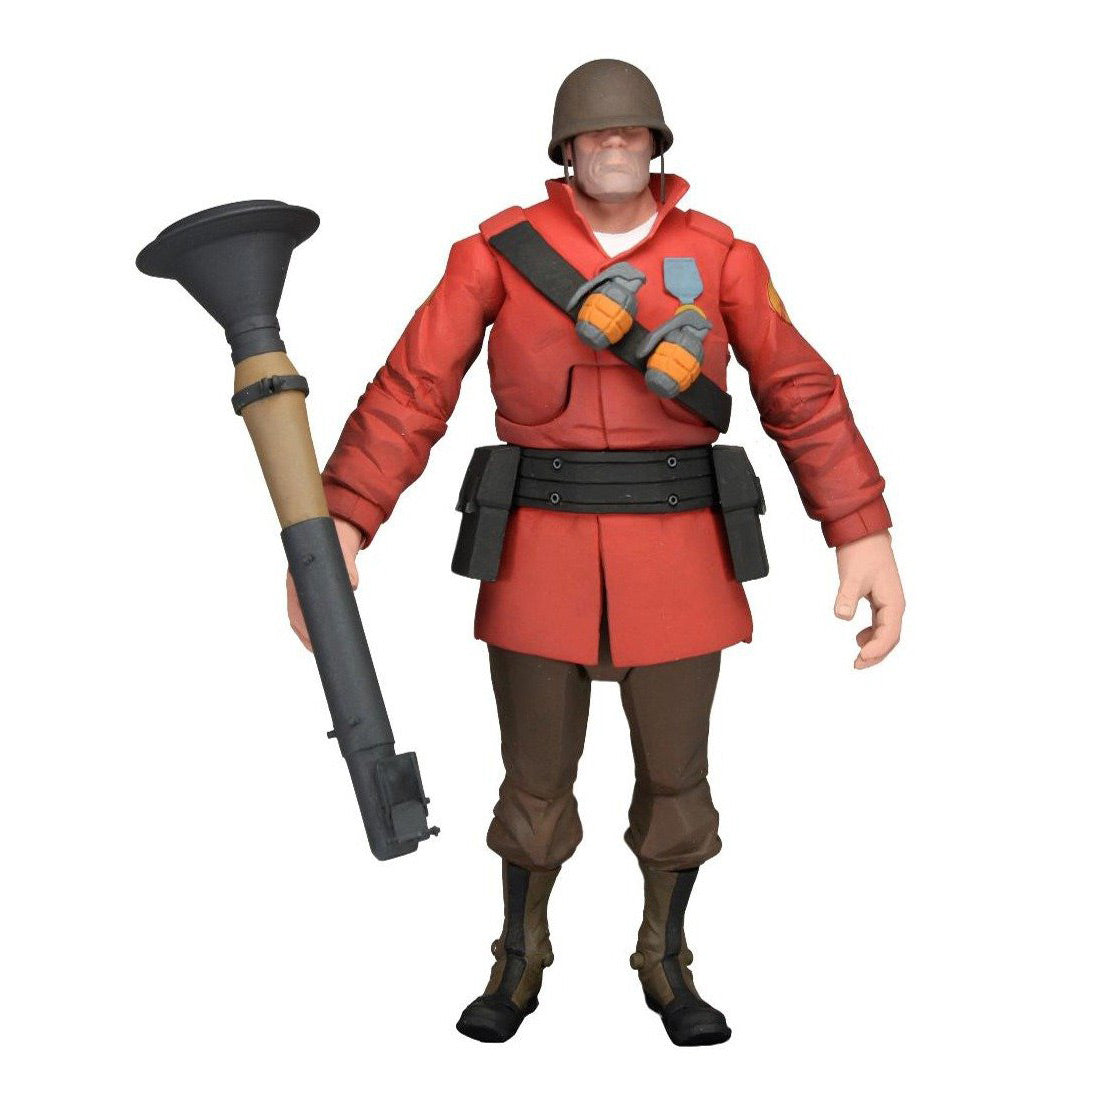 TF2 RED SOLDIER NECA ACTION FIGURE